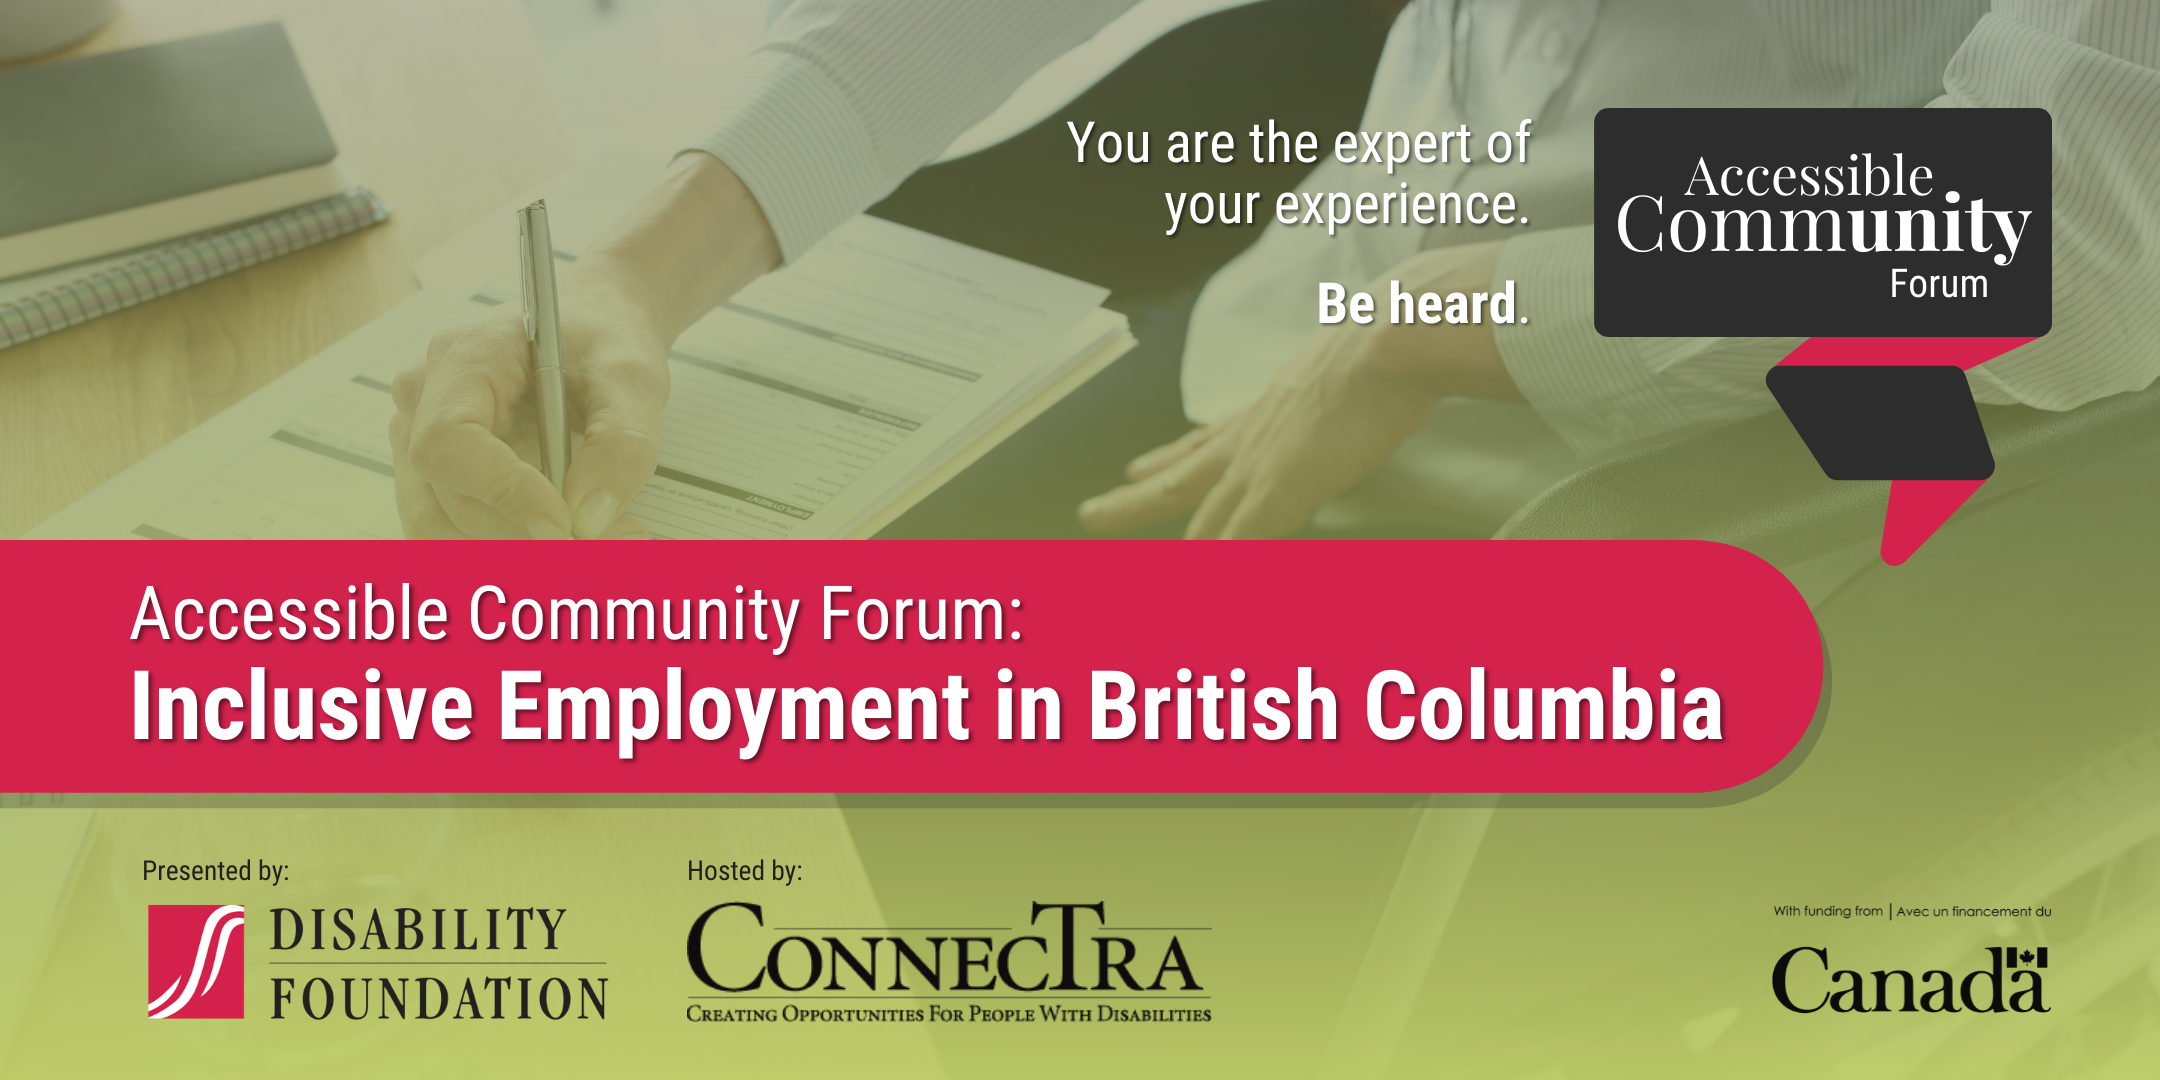 Person sitting at desk filling out form. (Accessible Community Forum: Inclusive Employment in British Columbia. You are the expert of your experience. Be heard. Presenteed by the Disability Foundation and hosted by ConnecTra.)